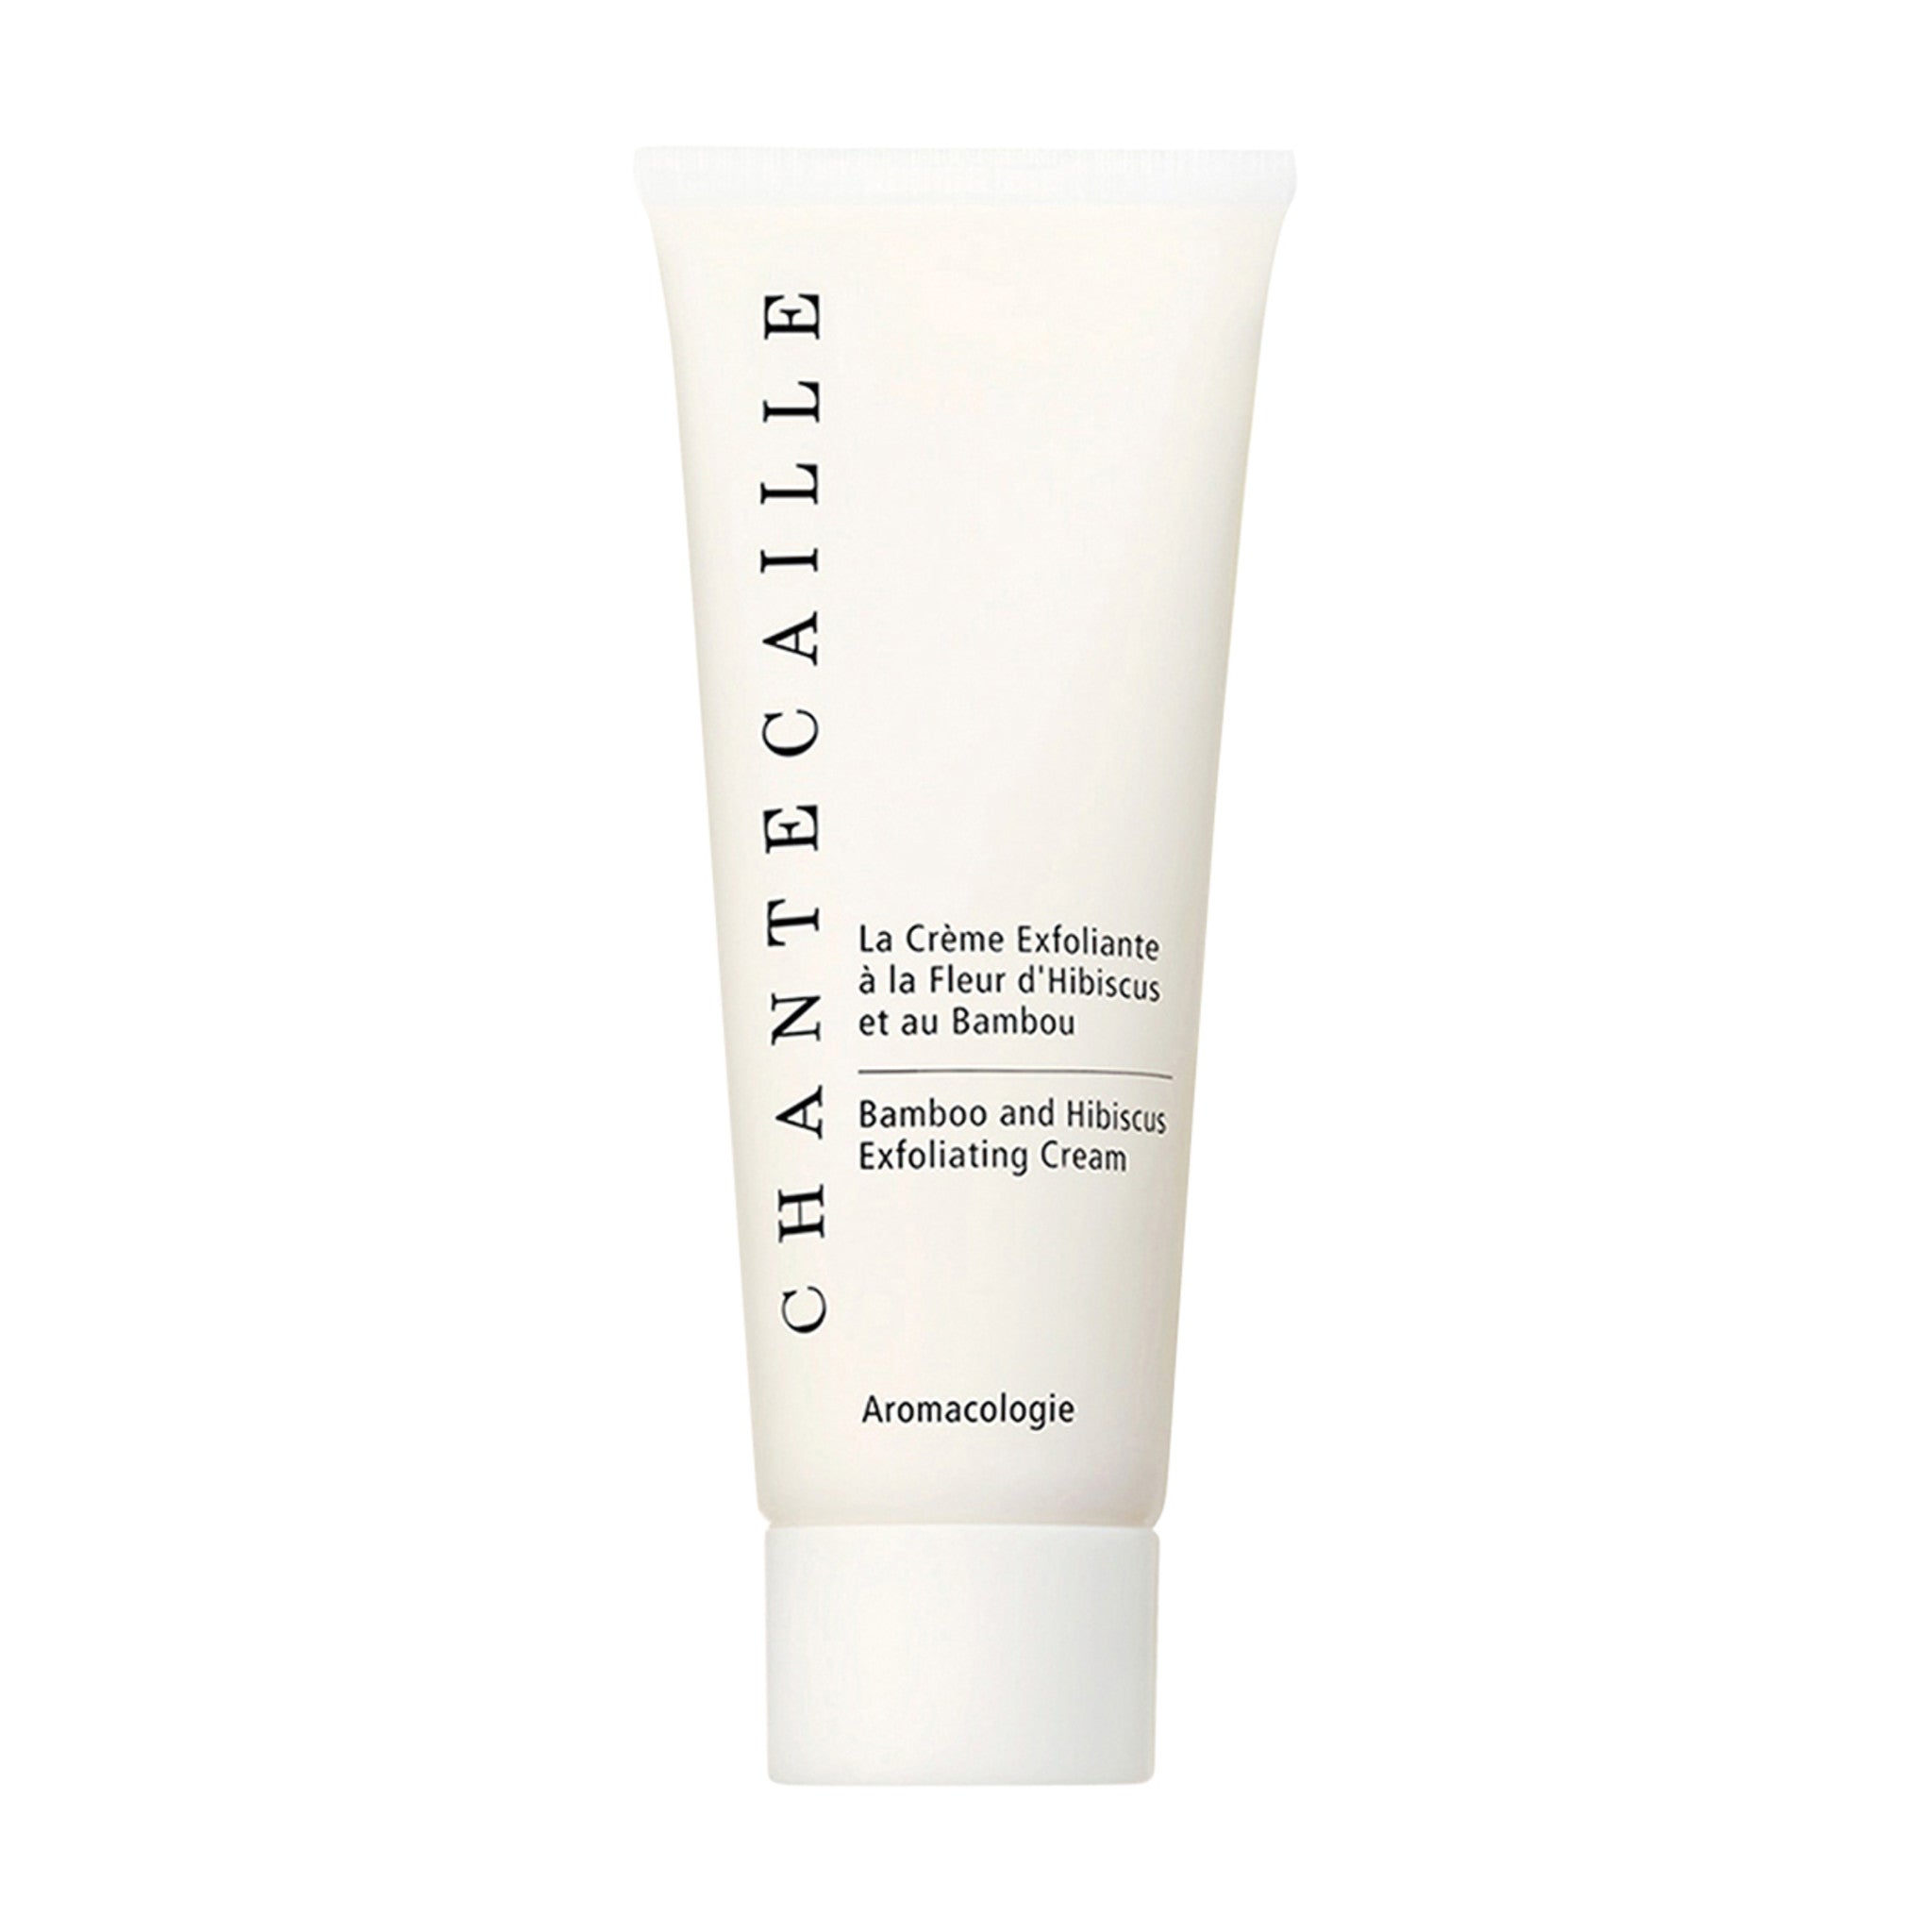 Chantecaille Bamboo and Hibiscus Exfoliating Cream main image.